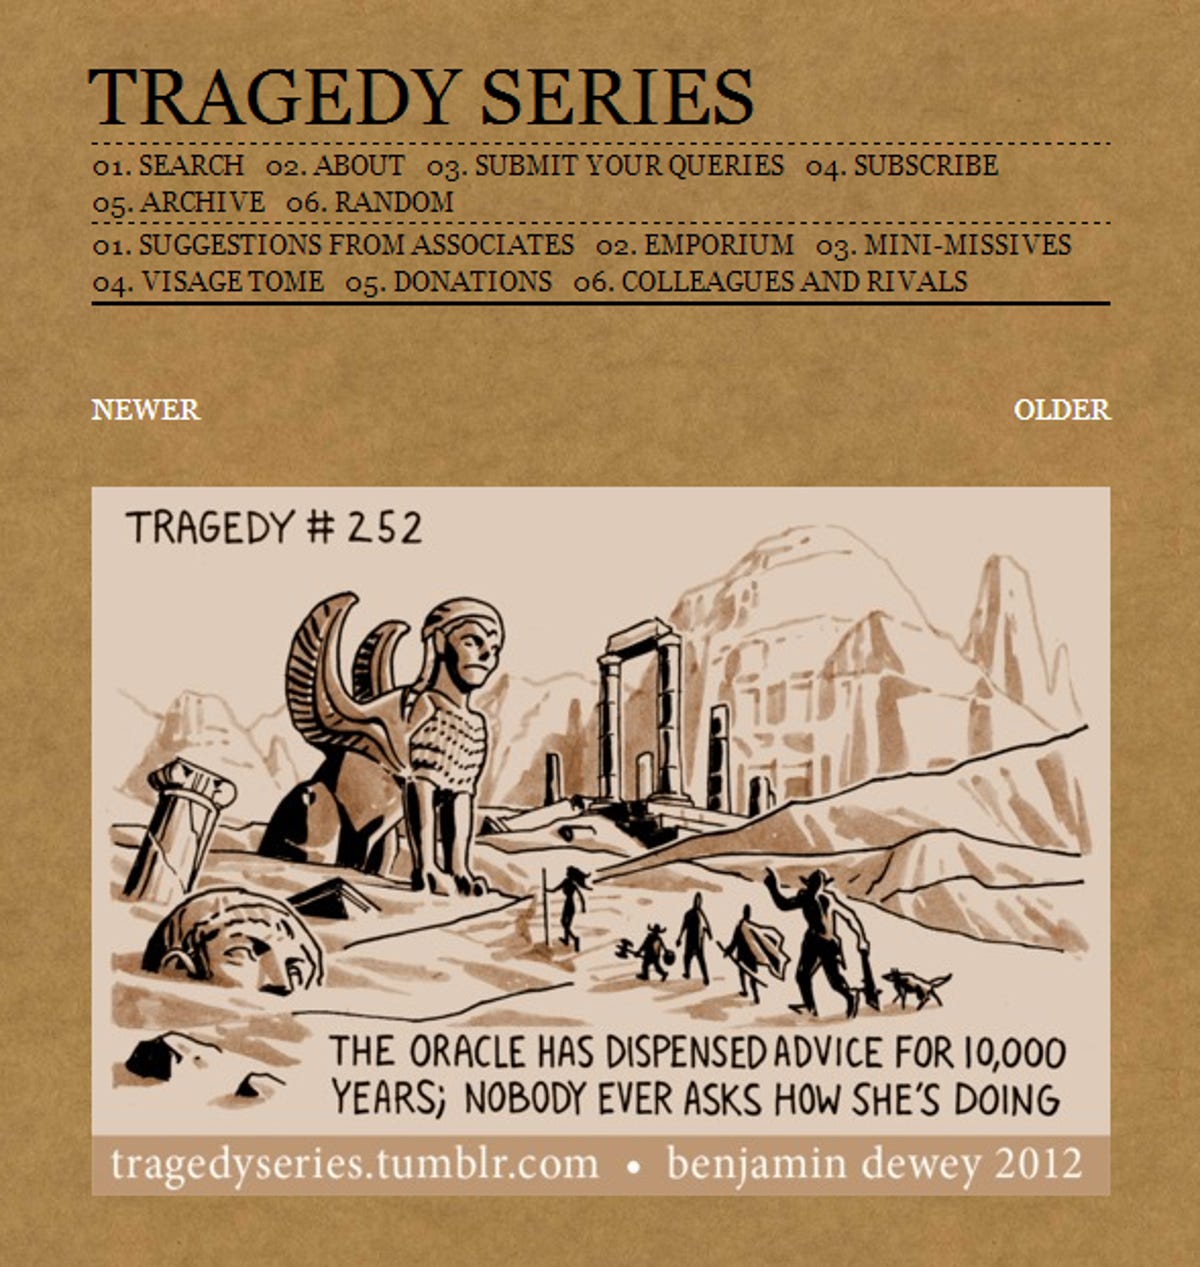 Tragedy Series #252: The Oracle